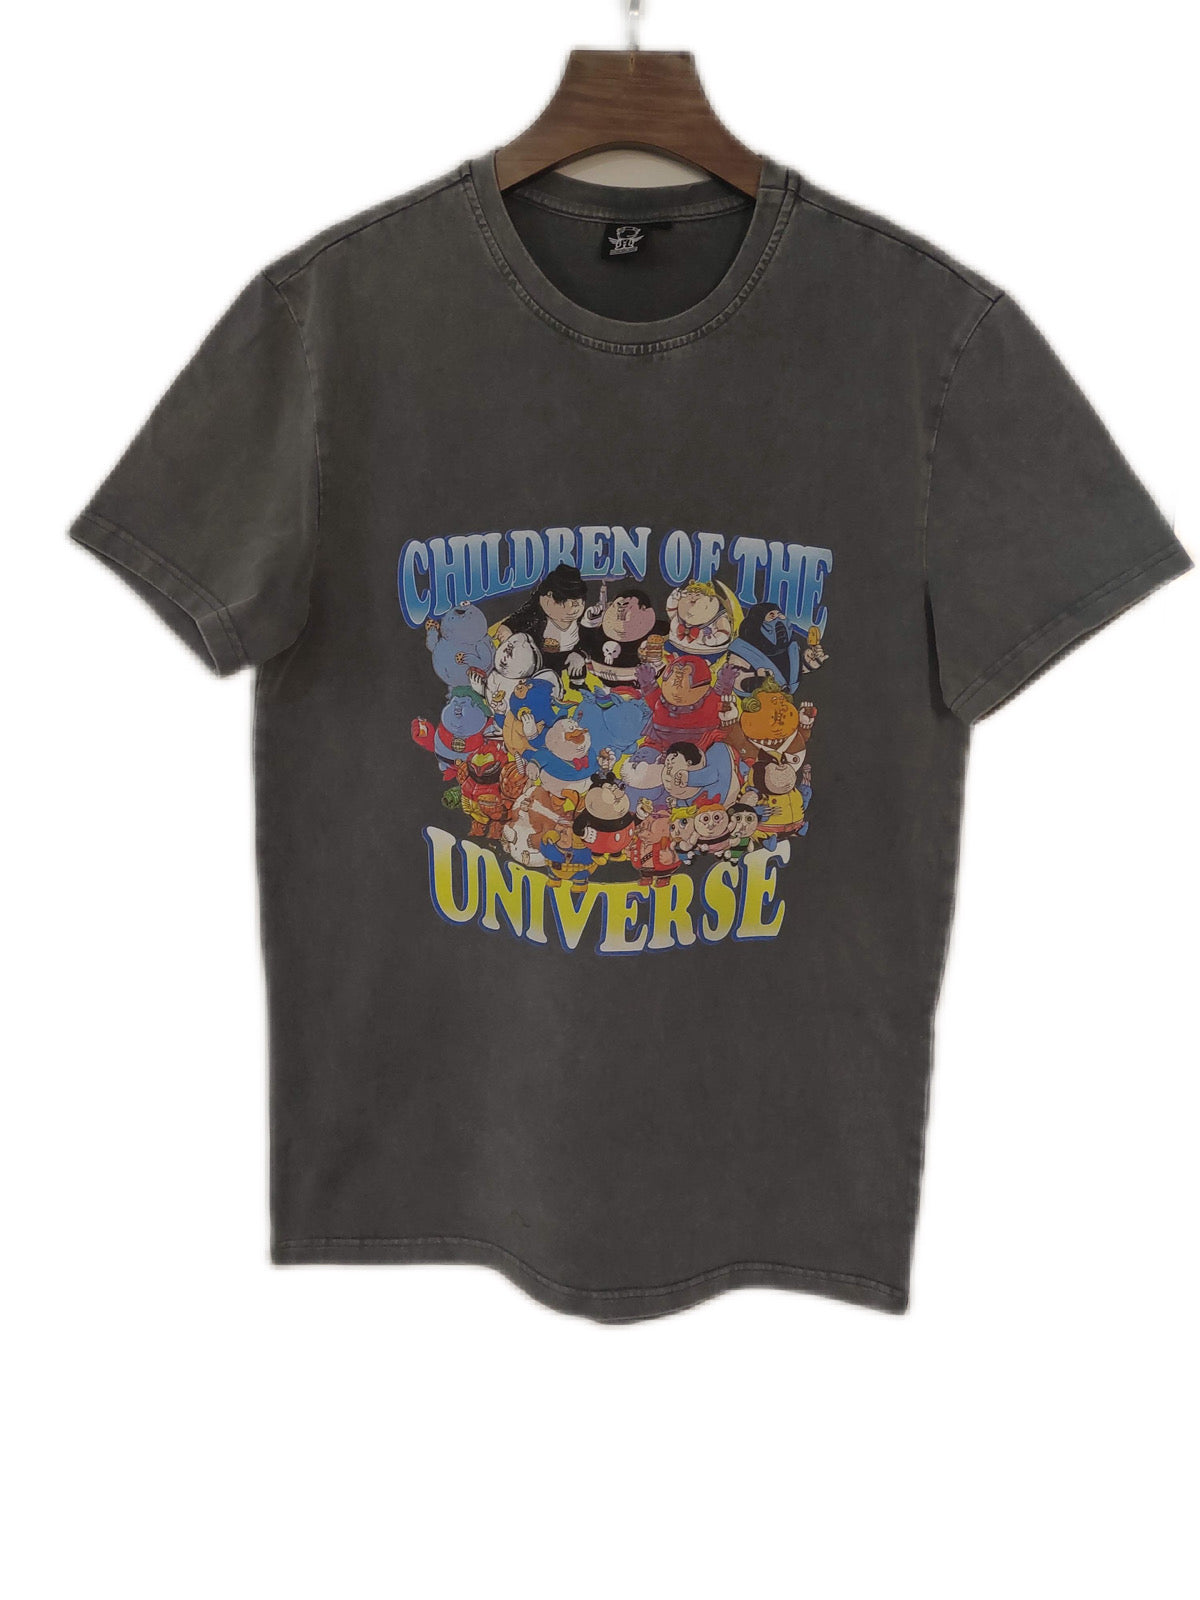 Children of the Universe “ Trouble Makers" T-Shirt